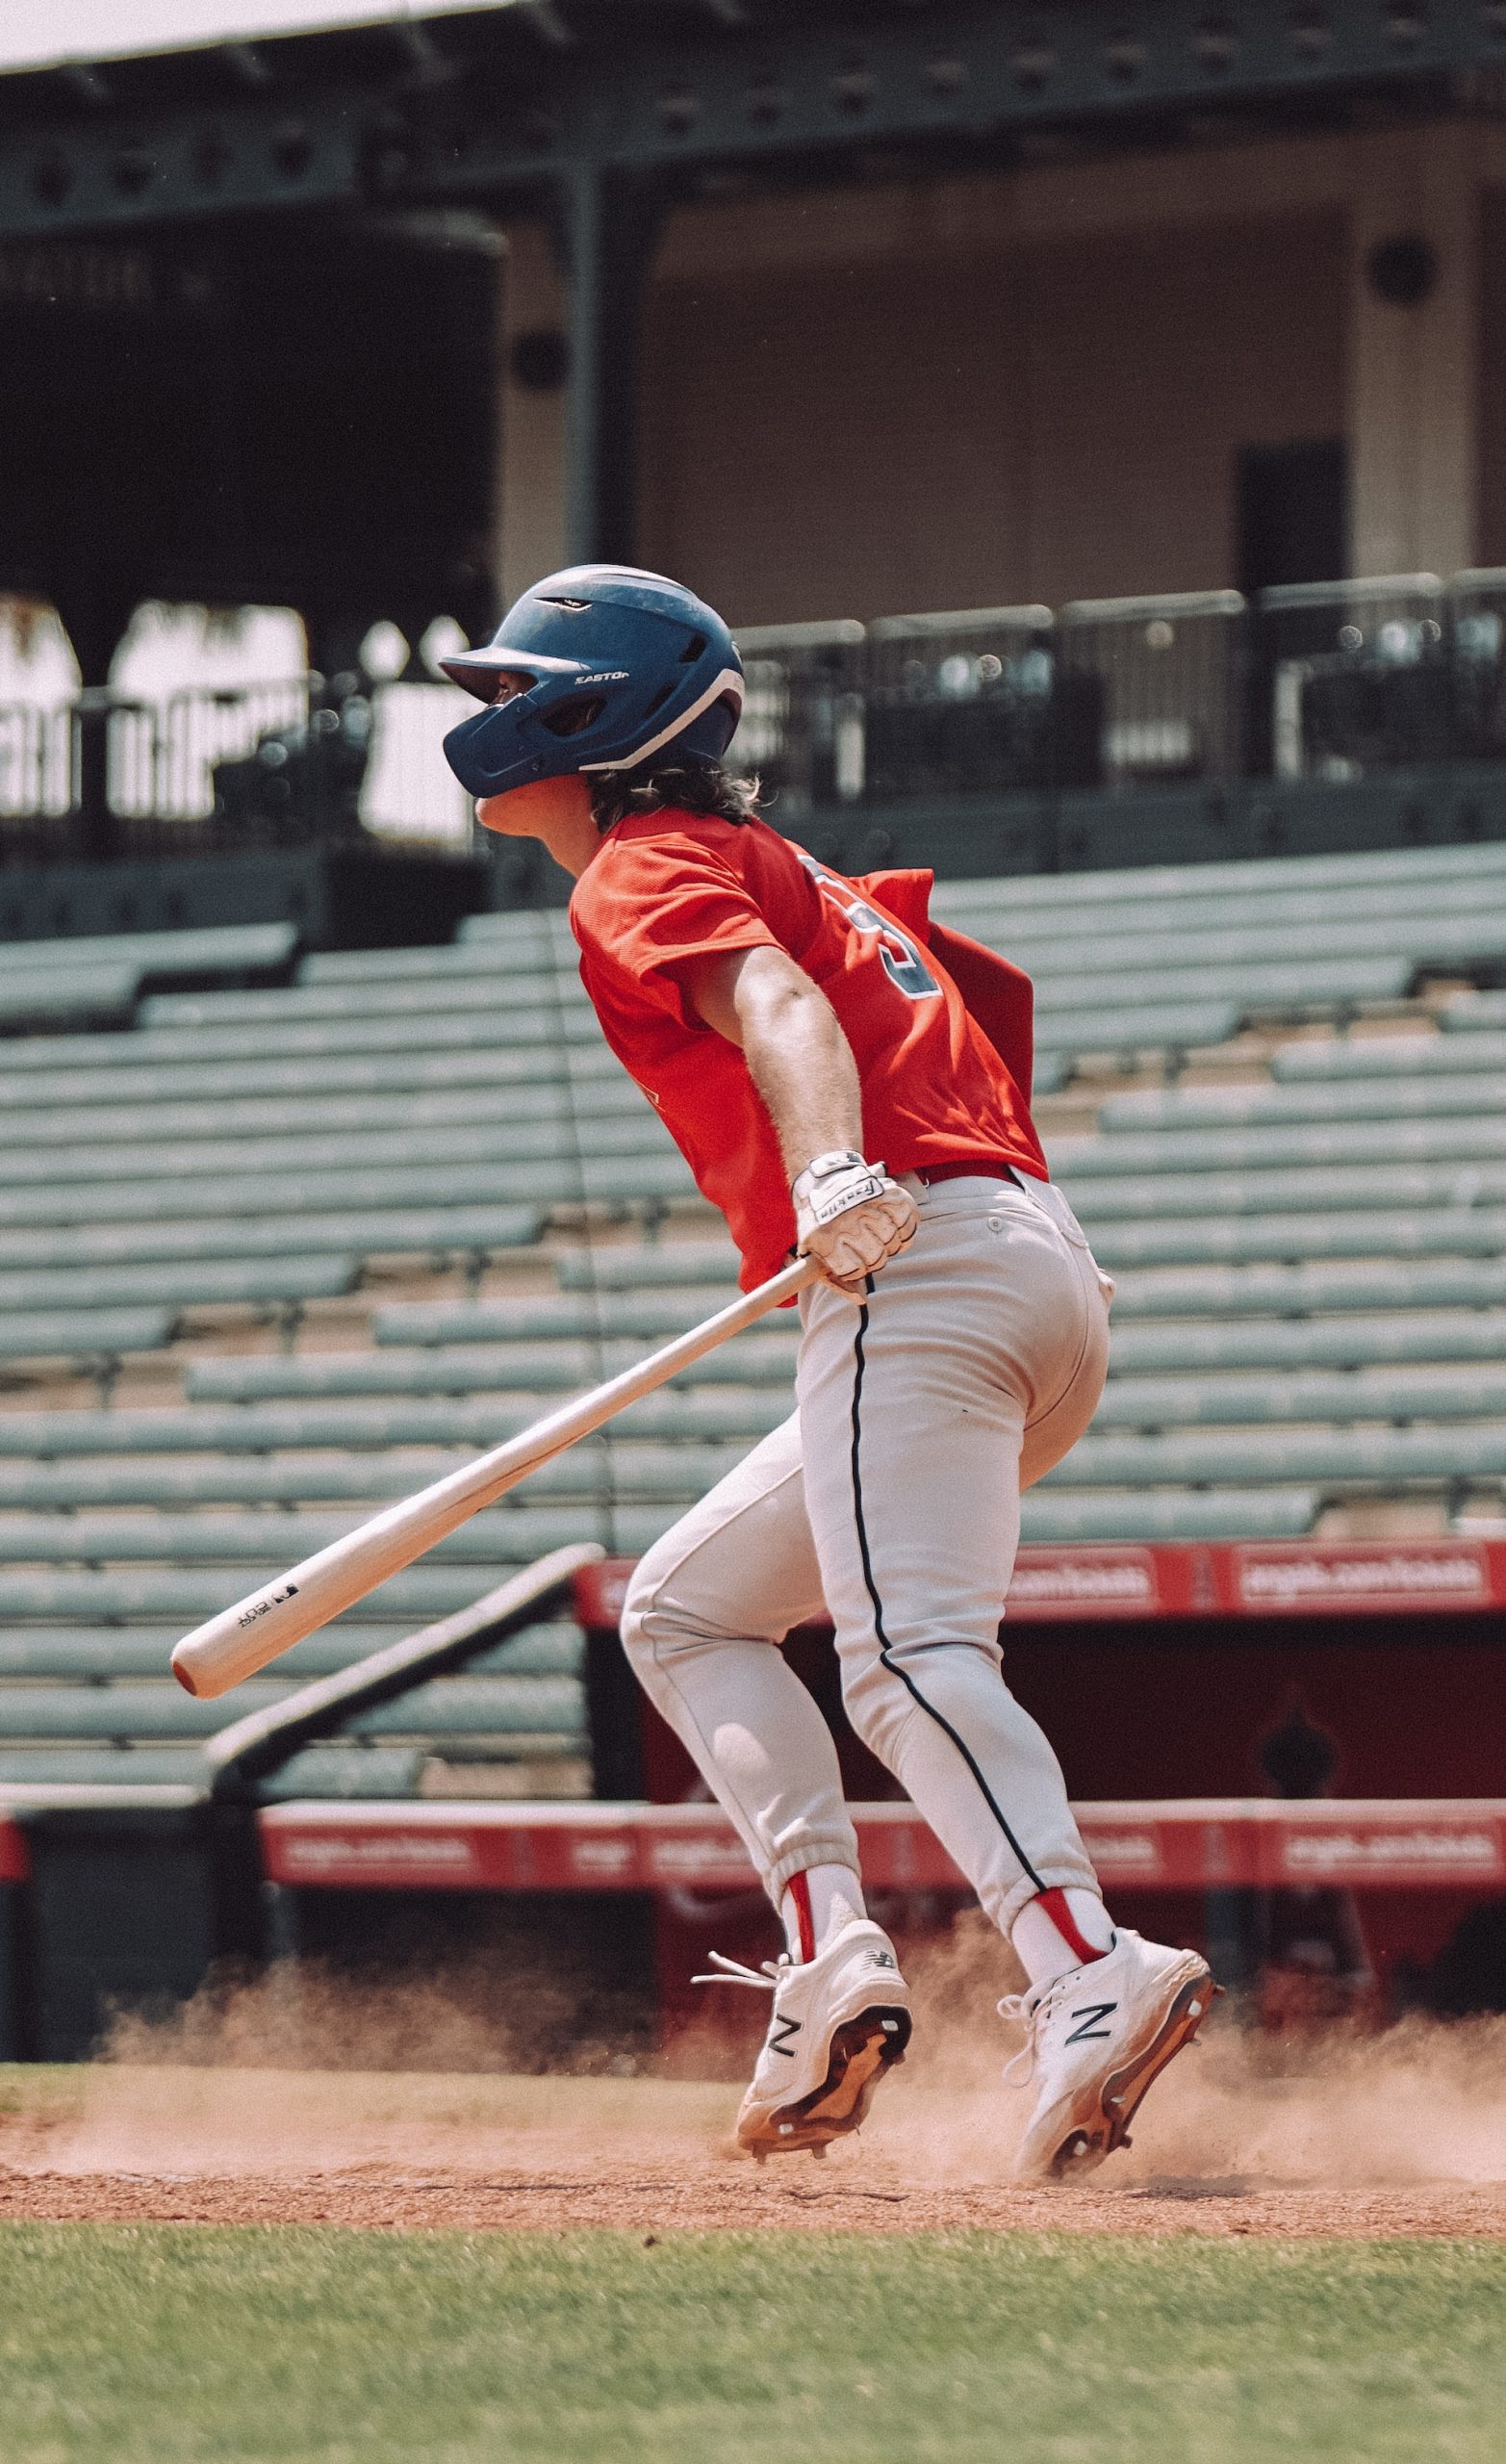 Unconventional Brilliance: Decoding the Decision to Deploy an M.V.P. Outfielder at Shortstop